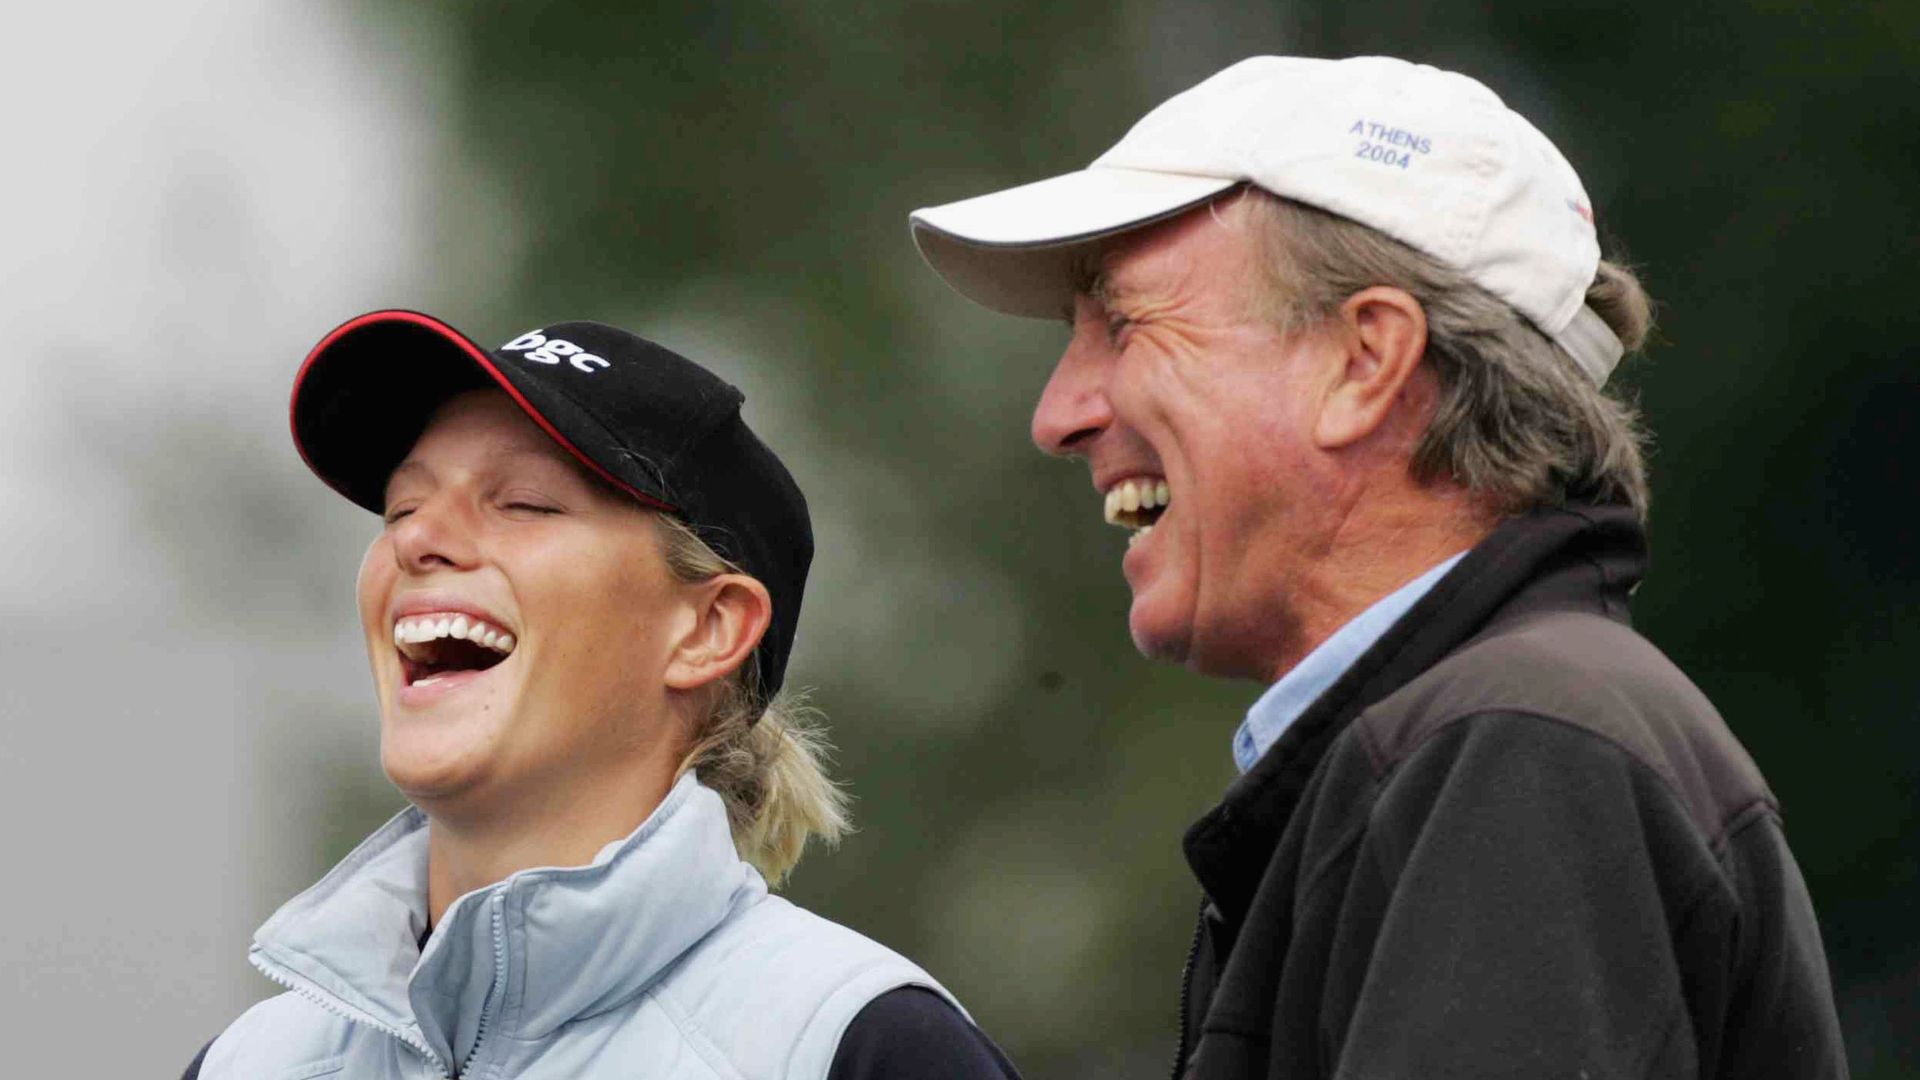 zara tindall laughing with dad mark 